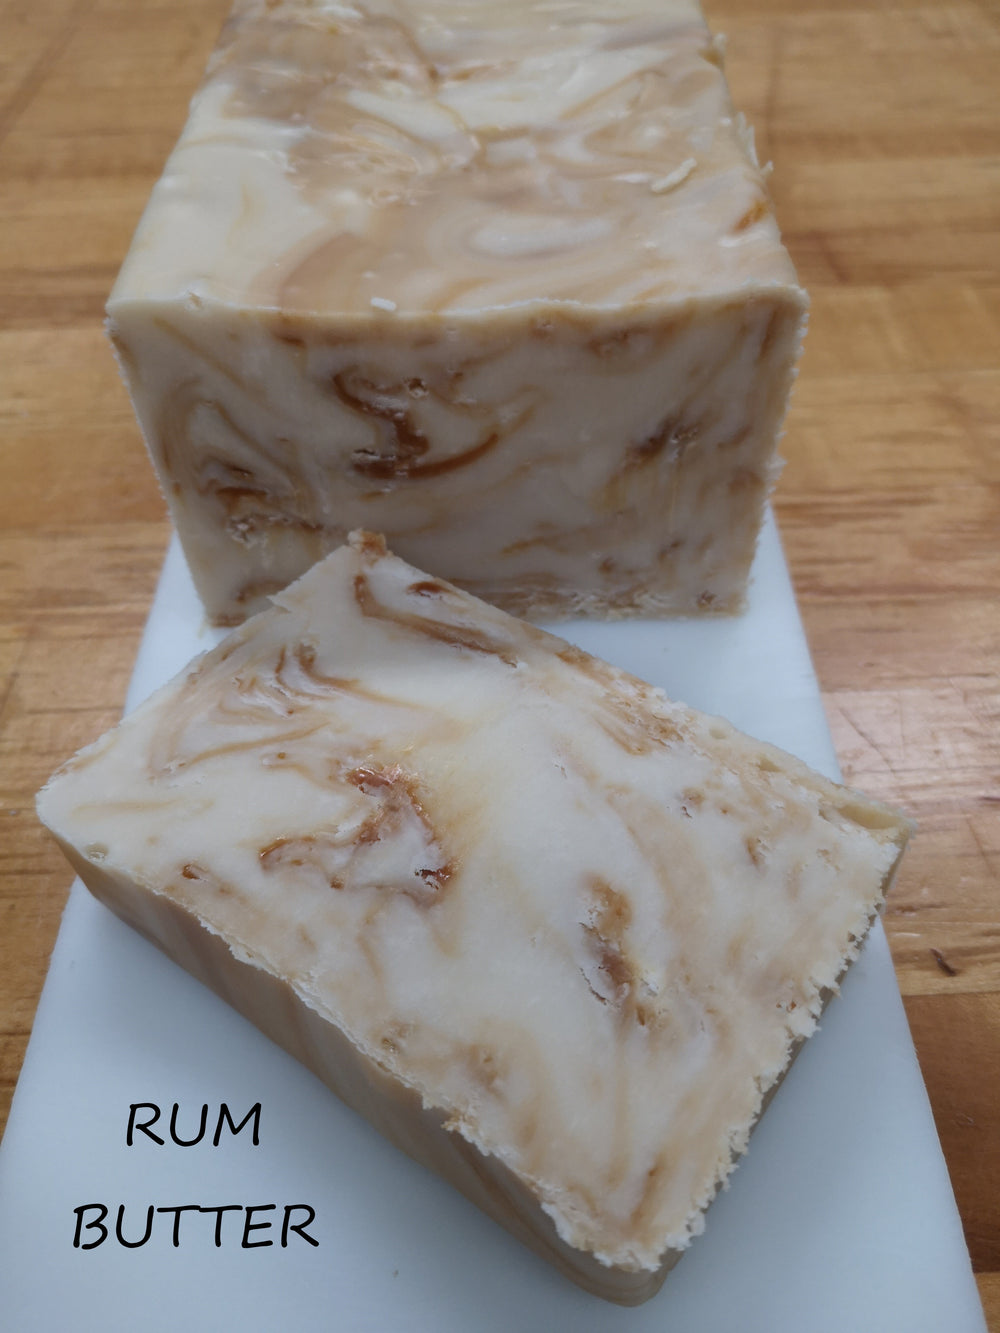 10 Rum Butter - 1/2 lb. Deli Containers - $37.50